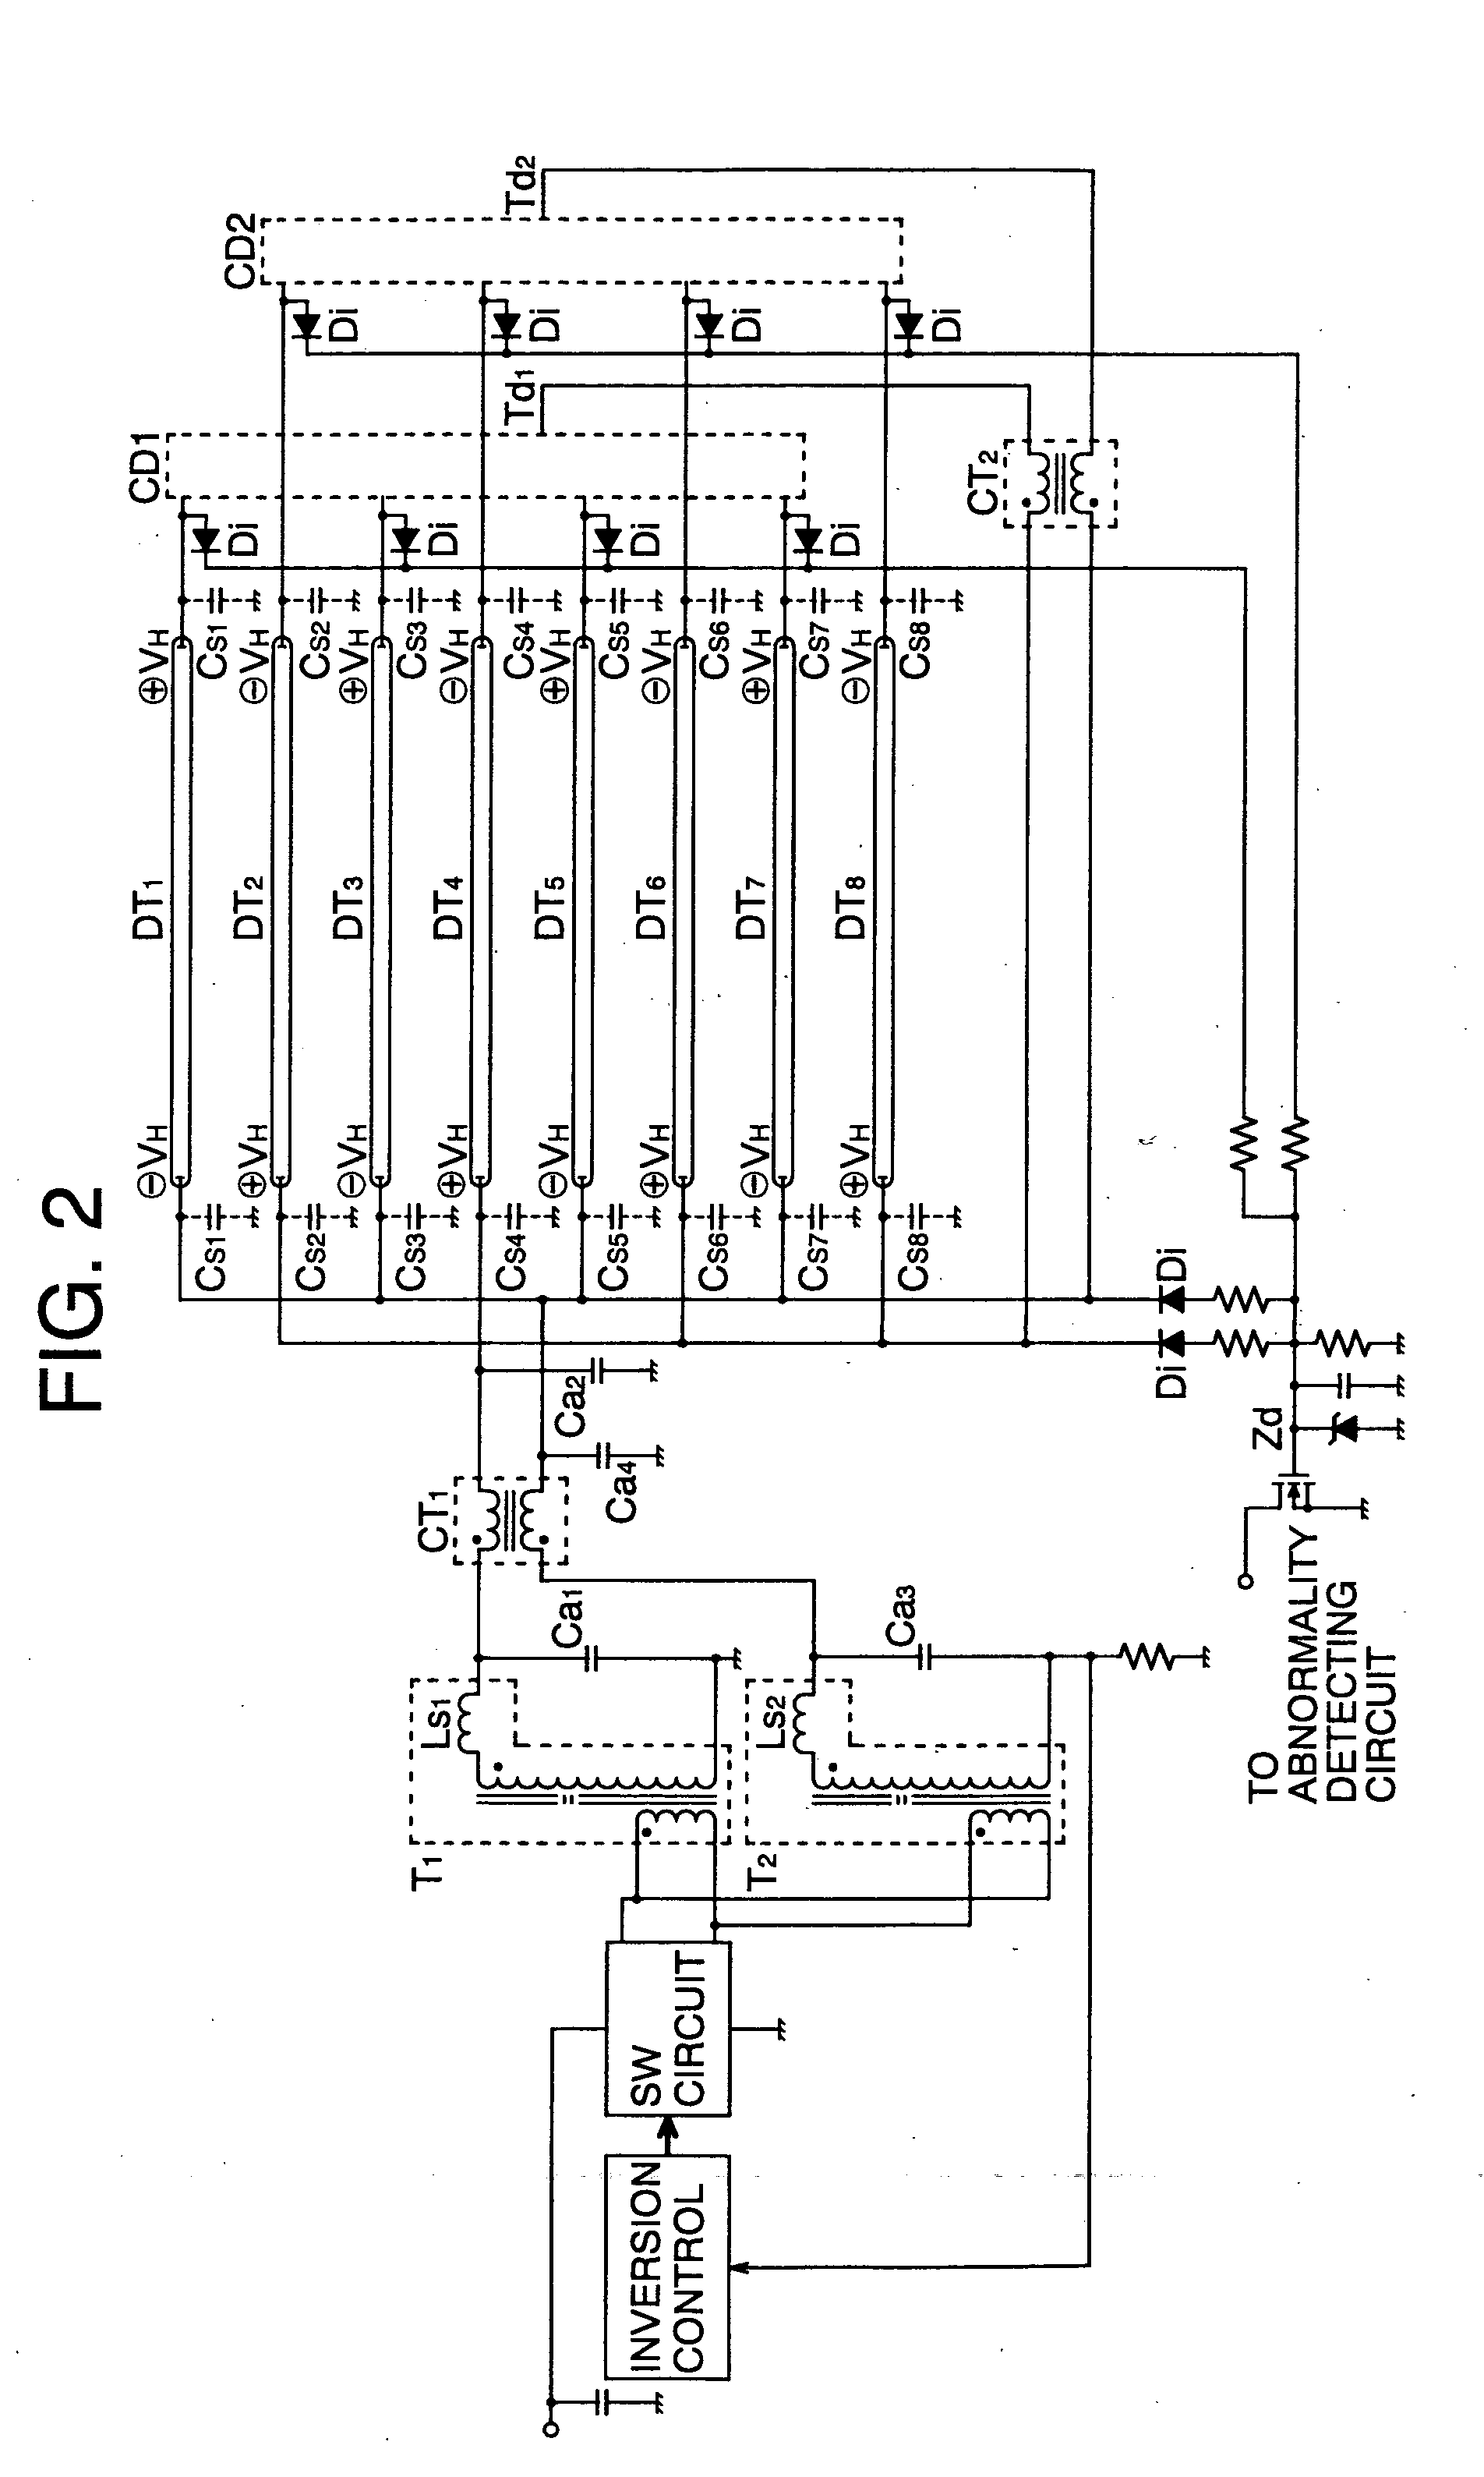 Parallel lighting system for surface light source discharge lamps